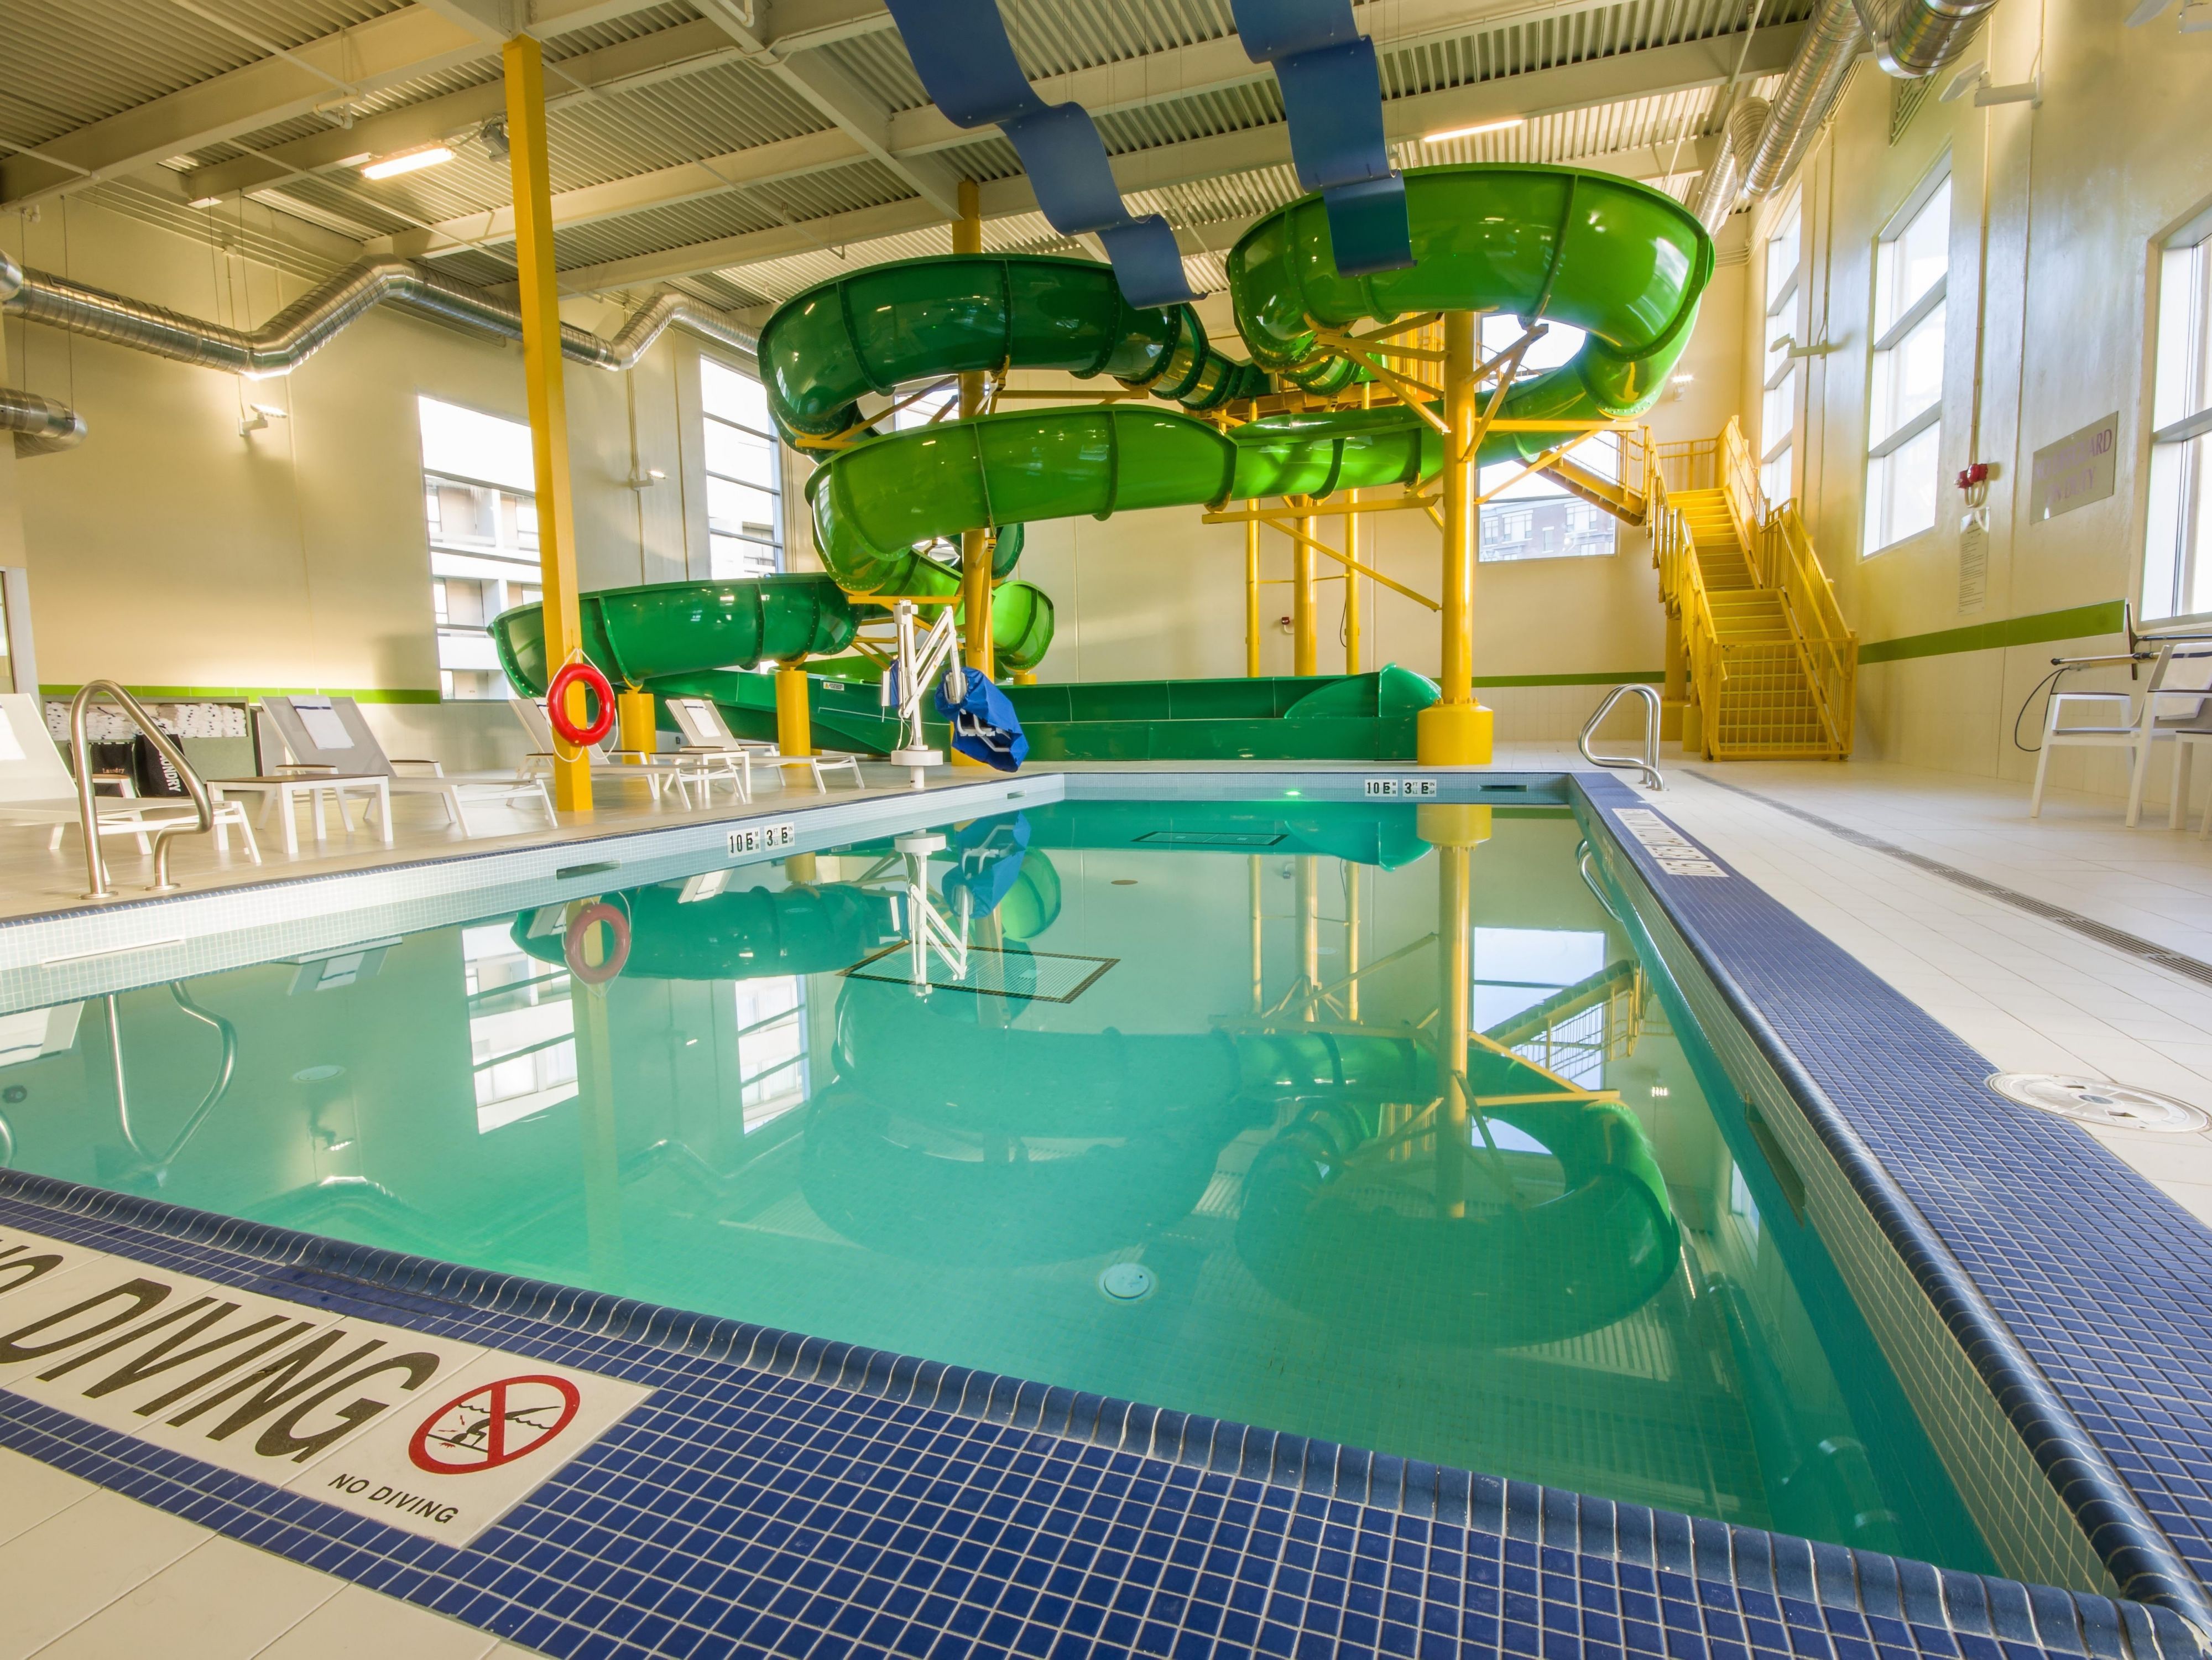 Fun for the whole family! Make a splash in our pool area that features two 165 foot waterslides and an indoor swimming pool. 